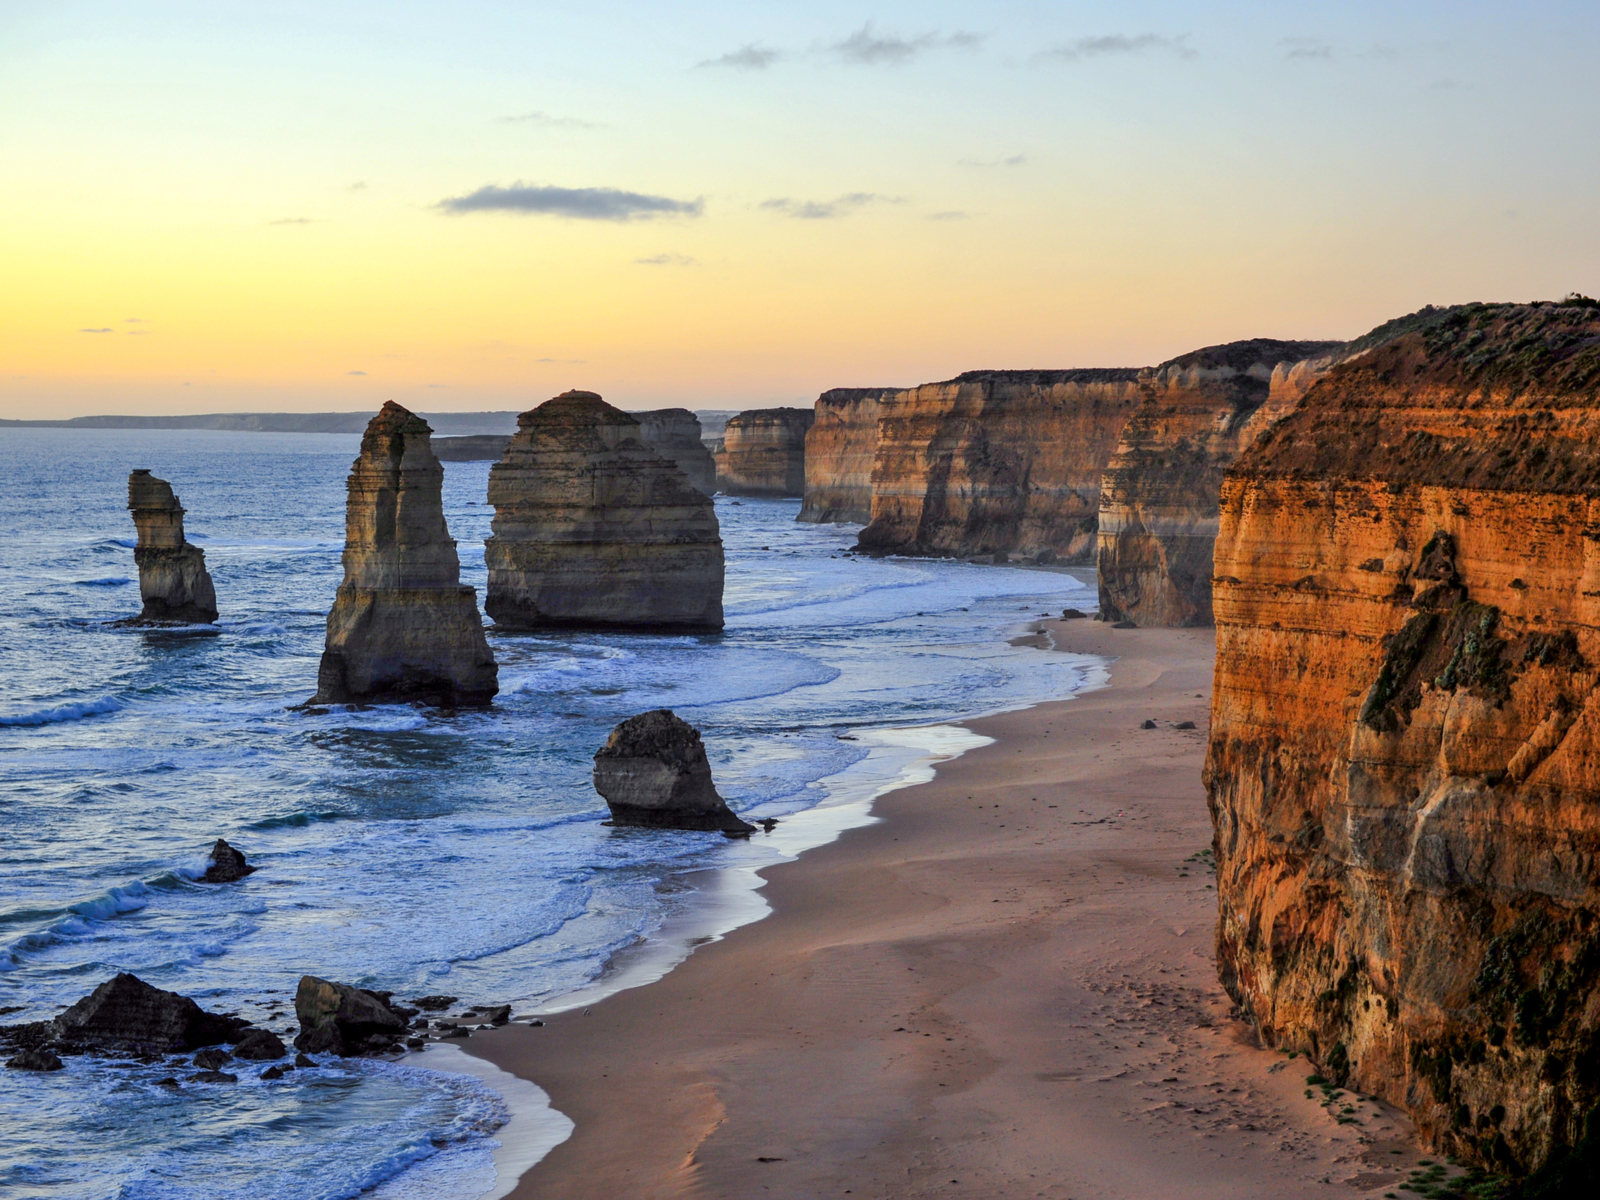 Sunset over The Great Ocean Walk, one of the best hikes in the world